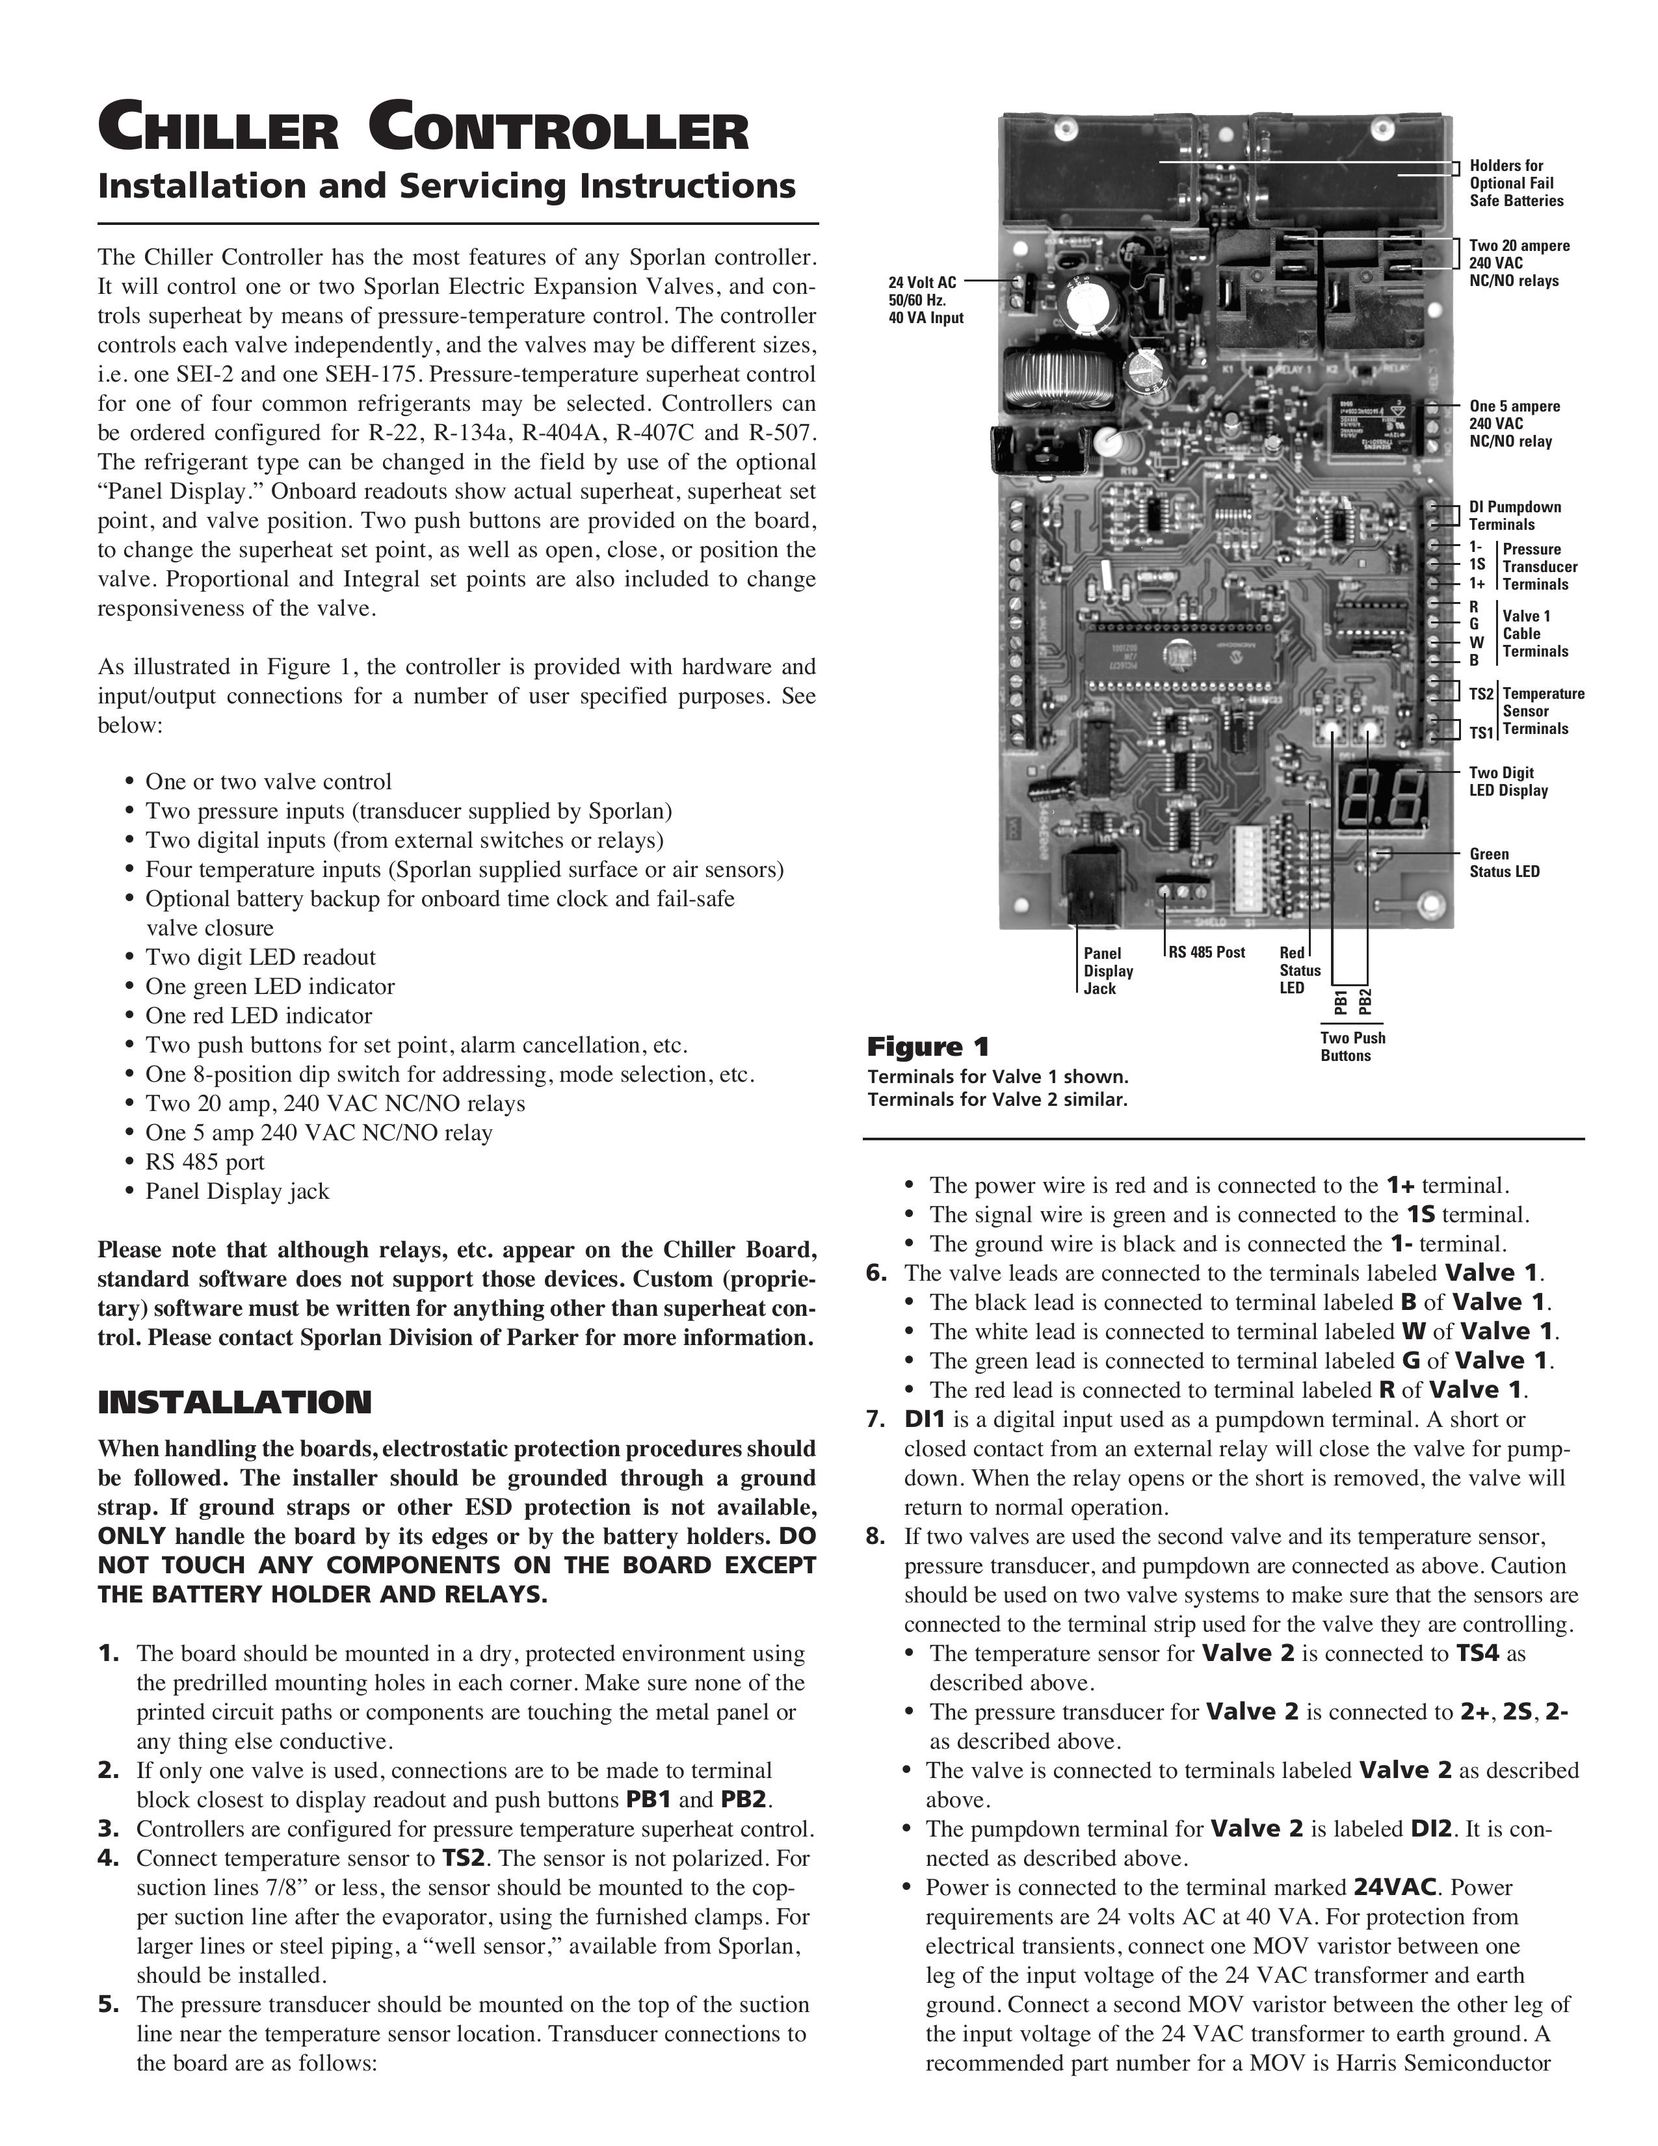 Parker Hannifin R-404A Network Card User Manual